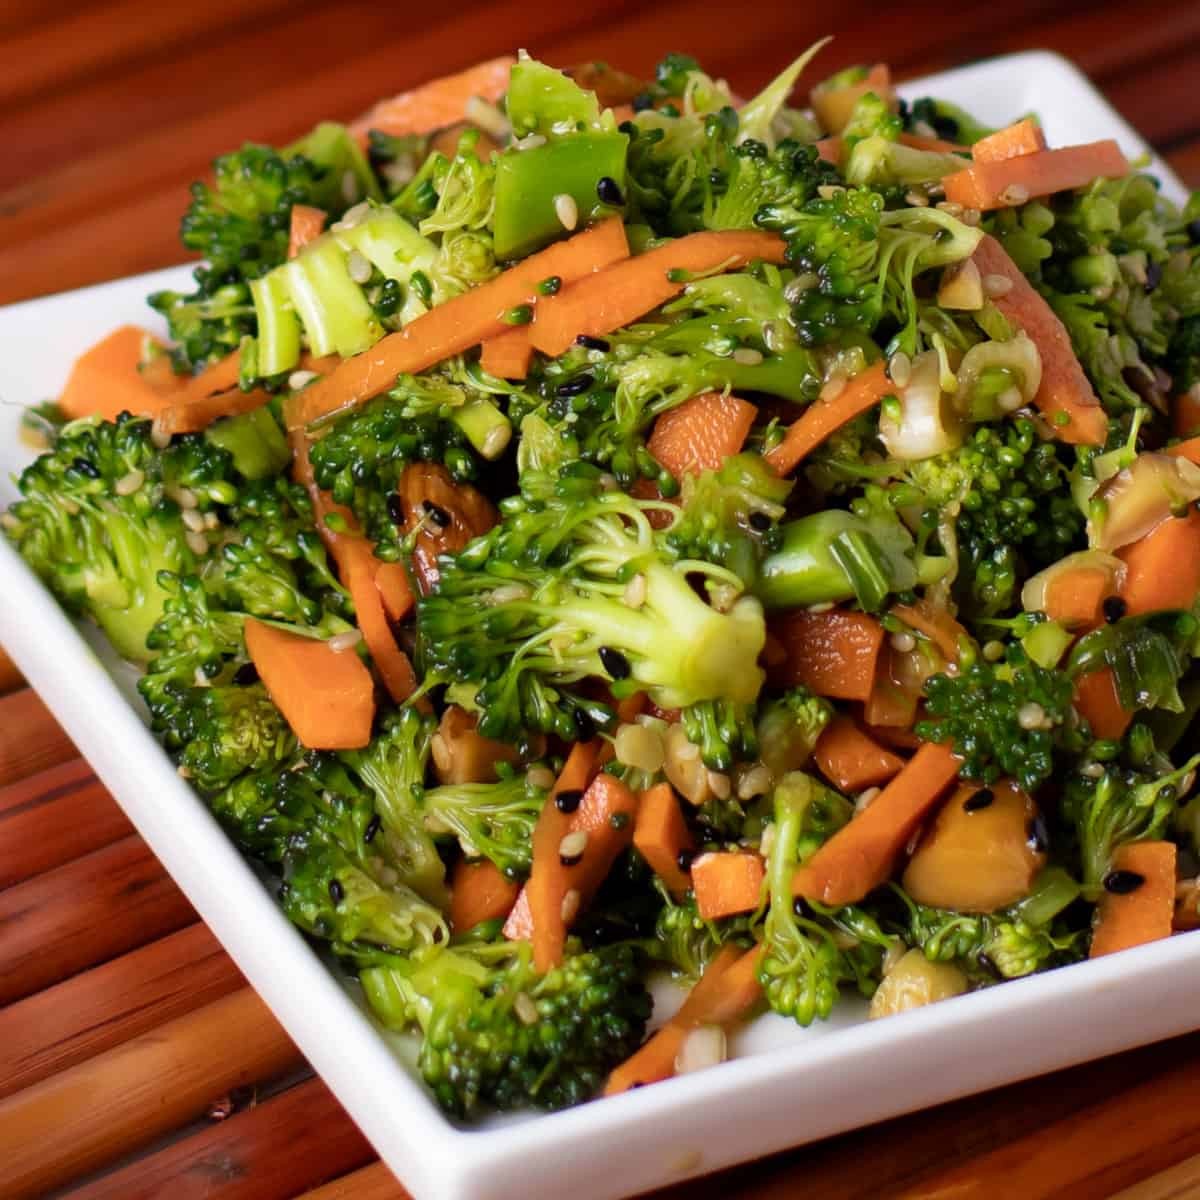 Overhead picture of salad with broccoli, carrots and more.